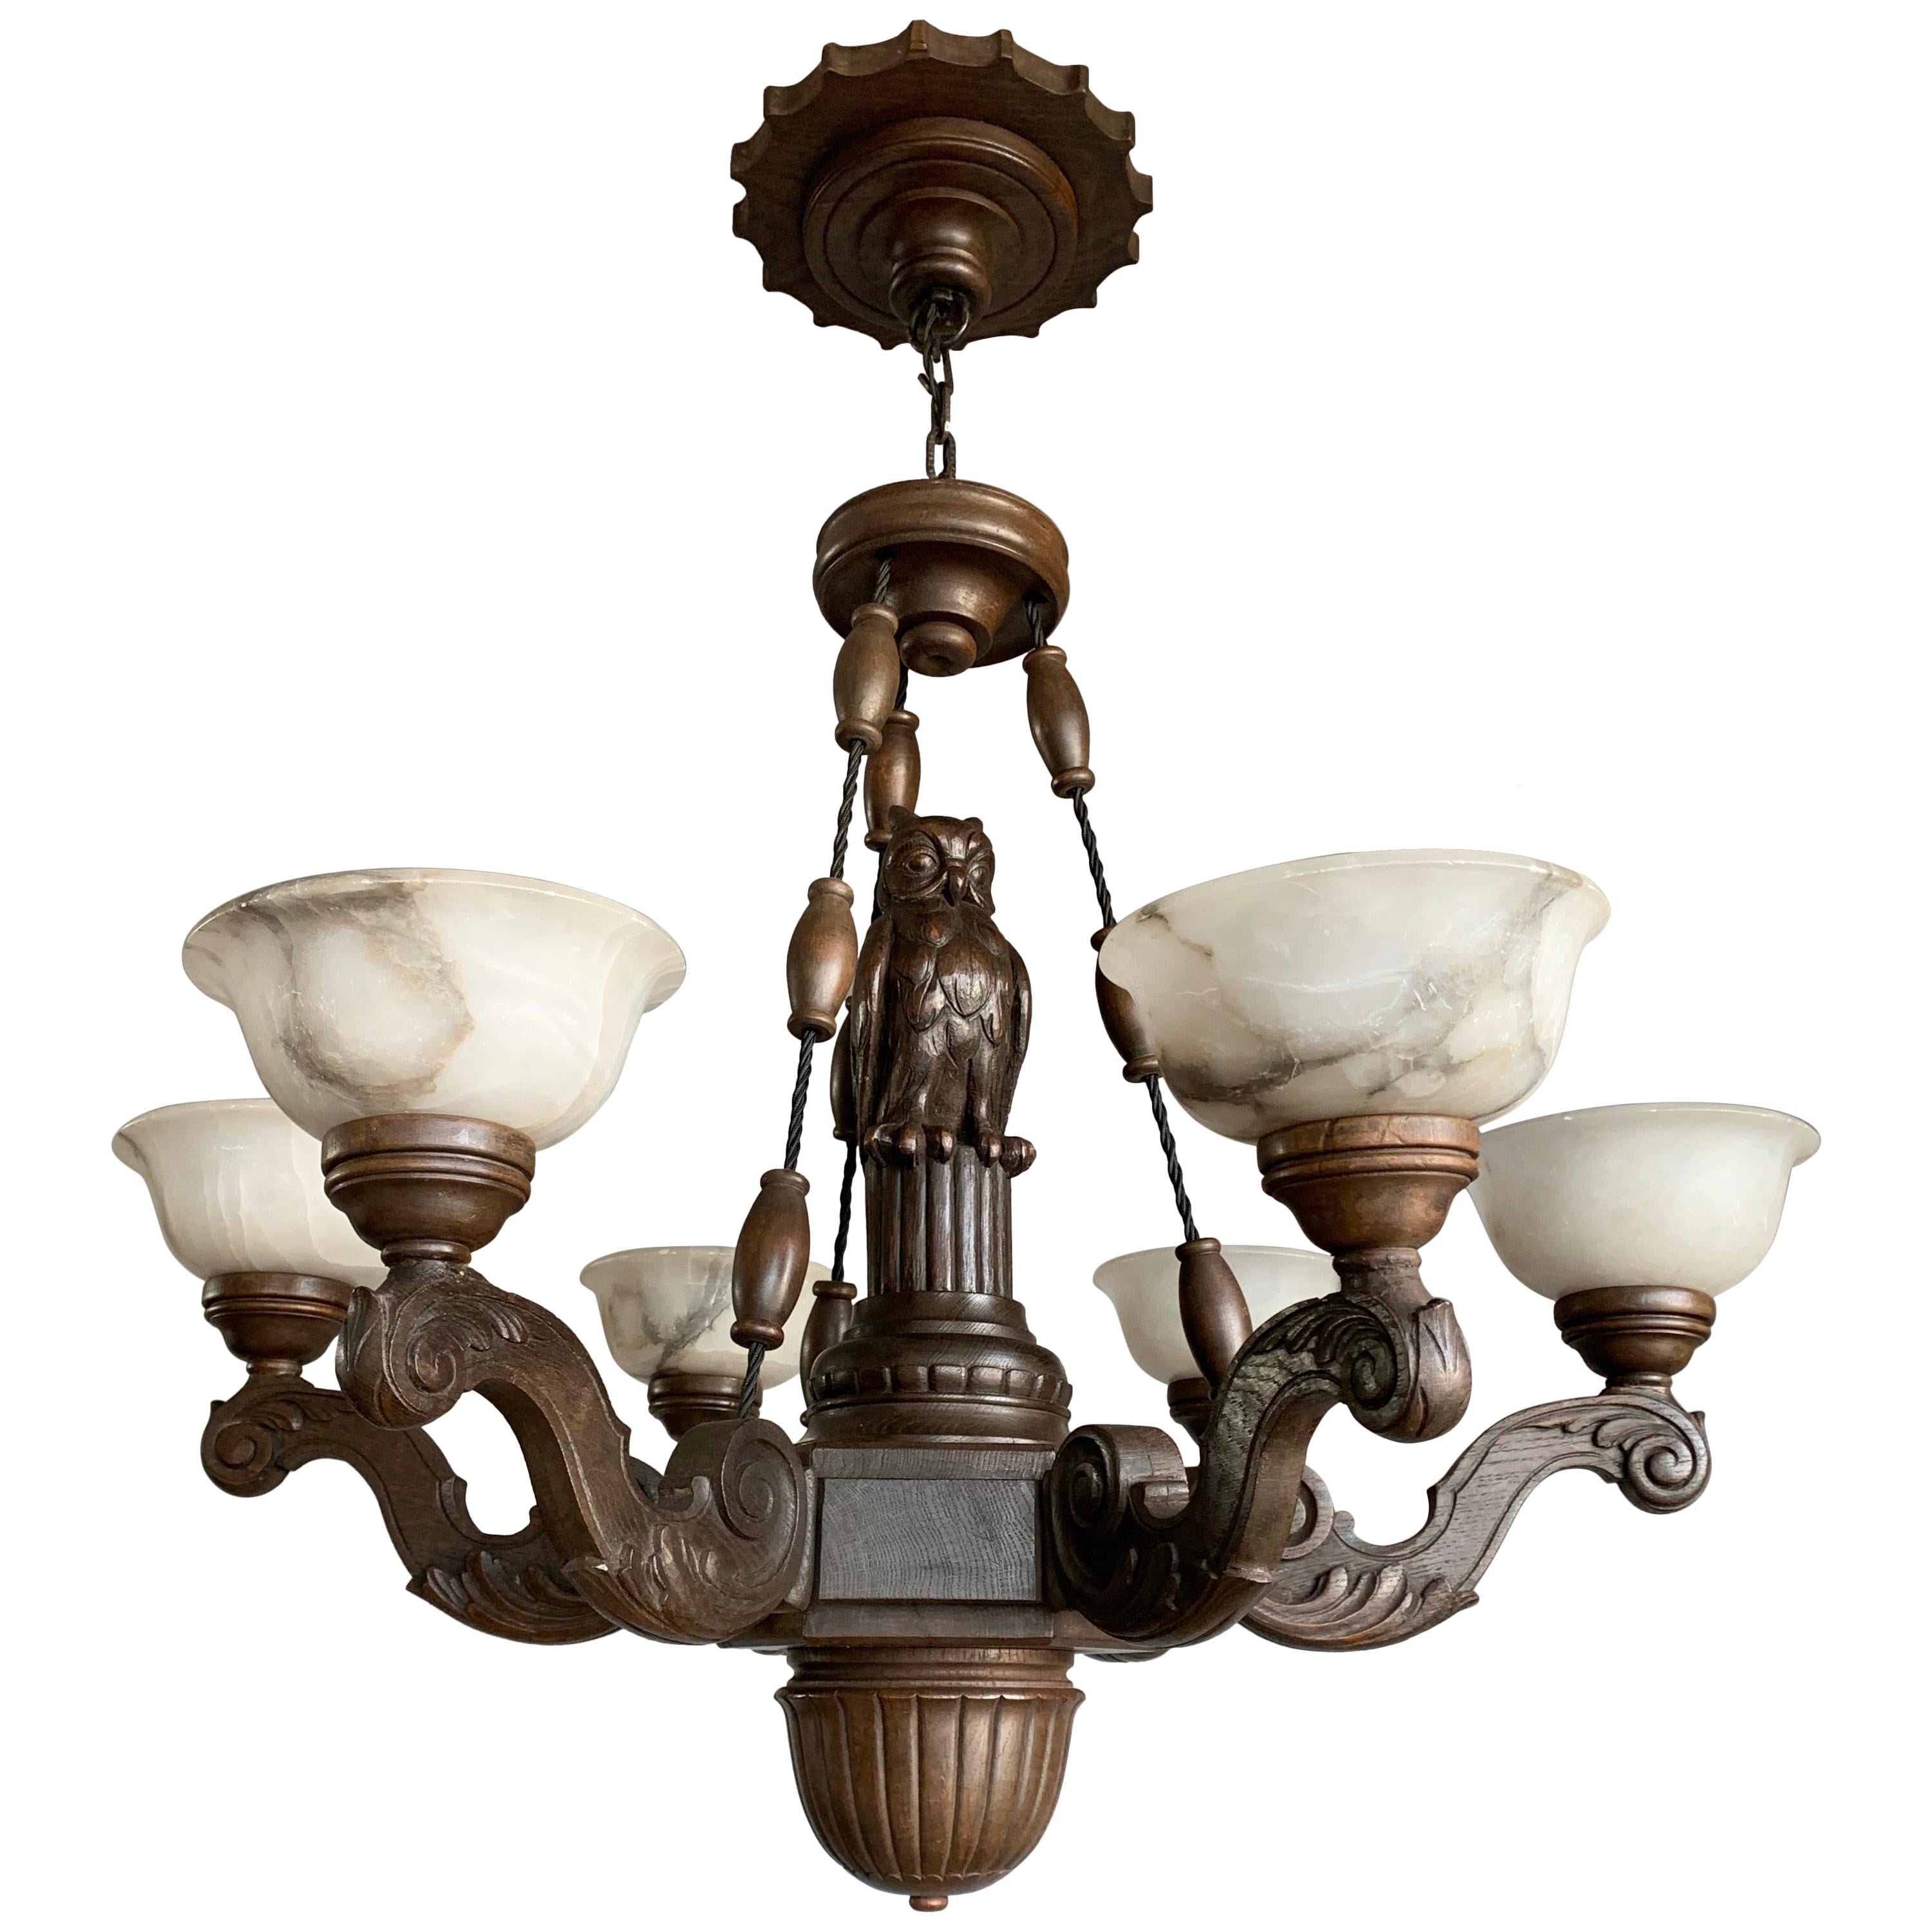 Amazing Arts & Crafts 6-Light Chandelier with Owl Sculpture and Alabaster Shades